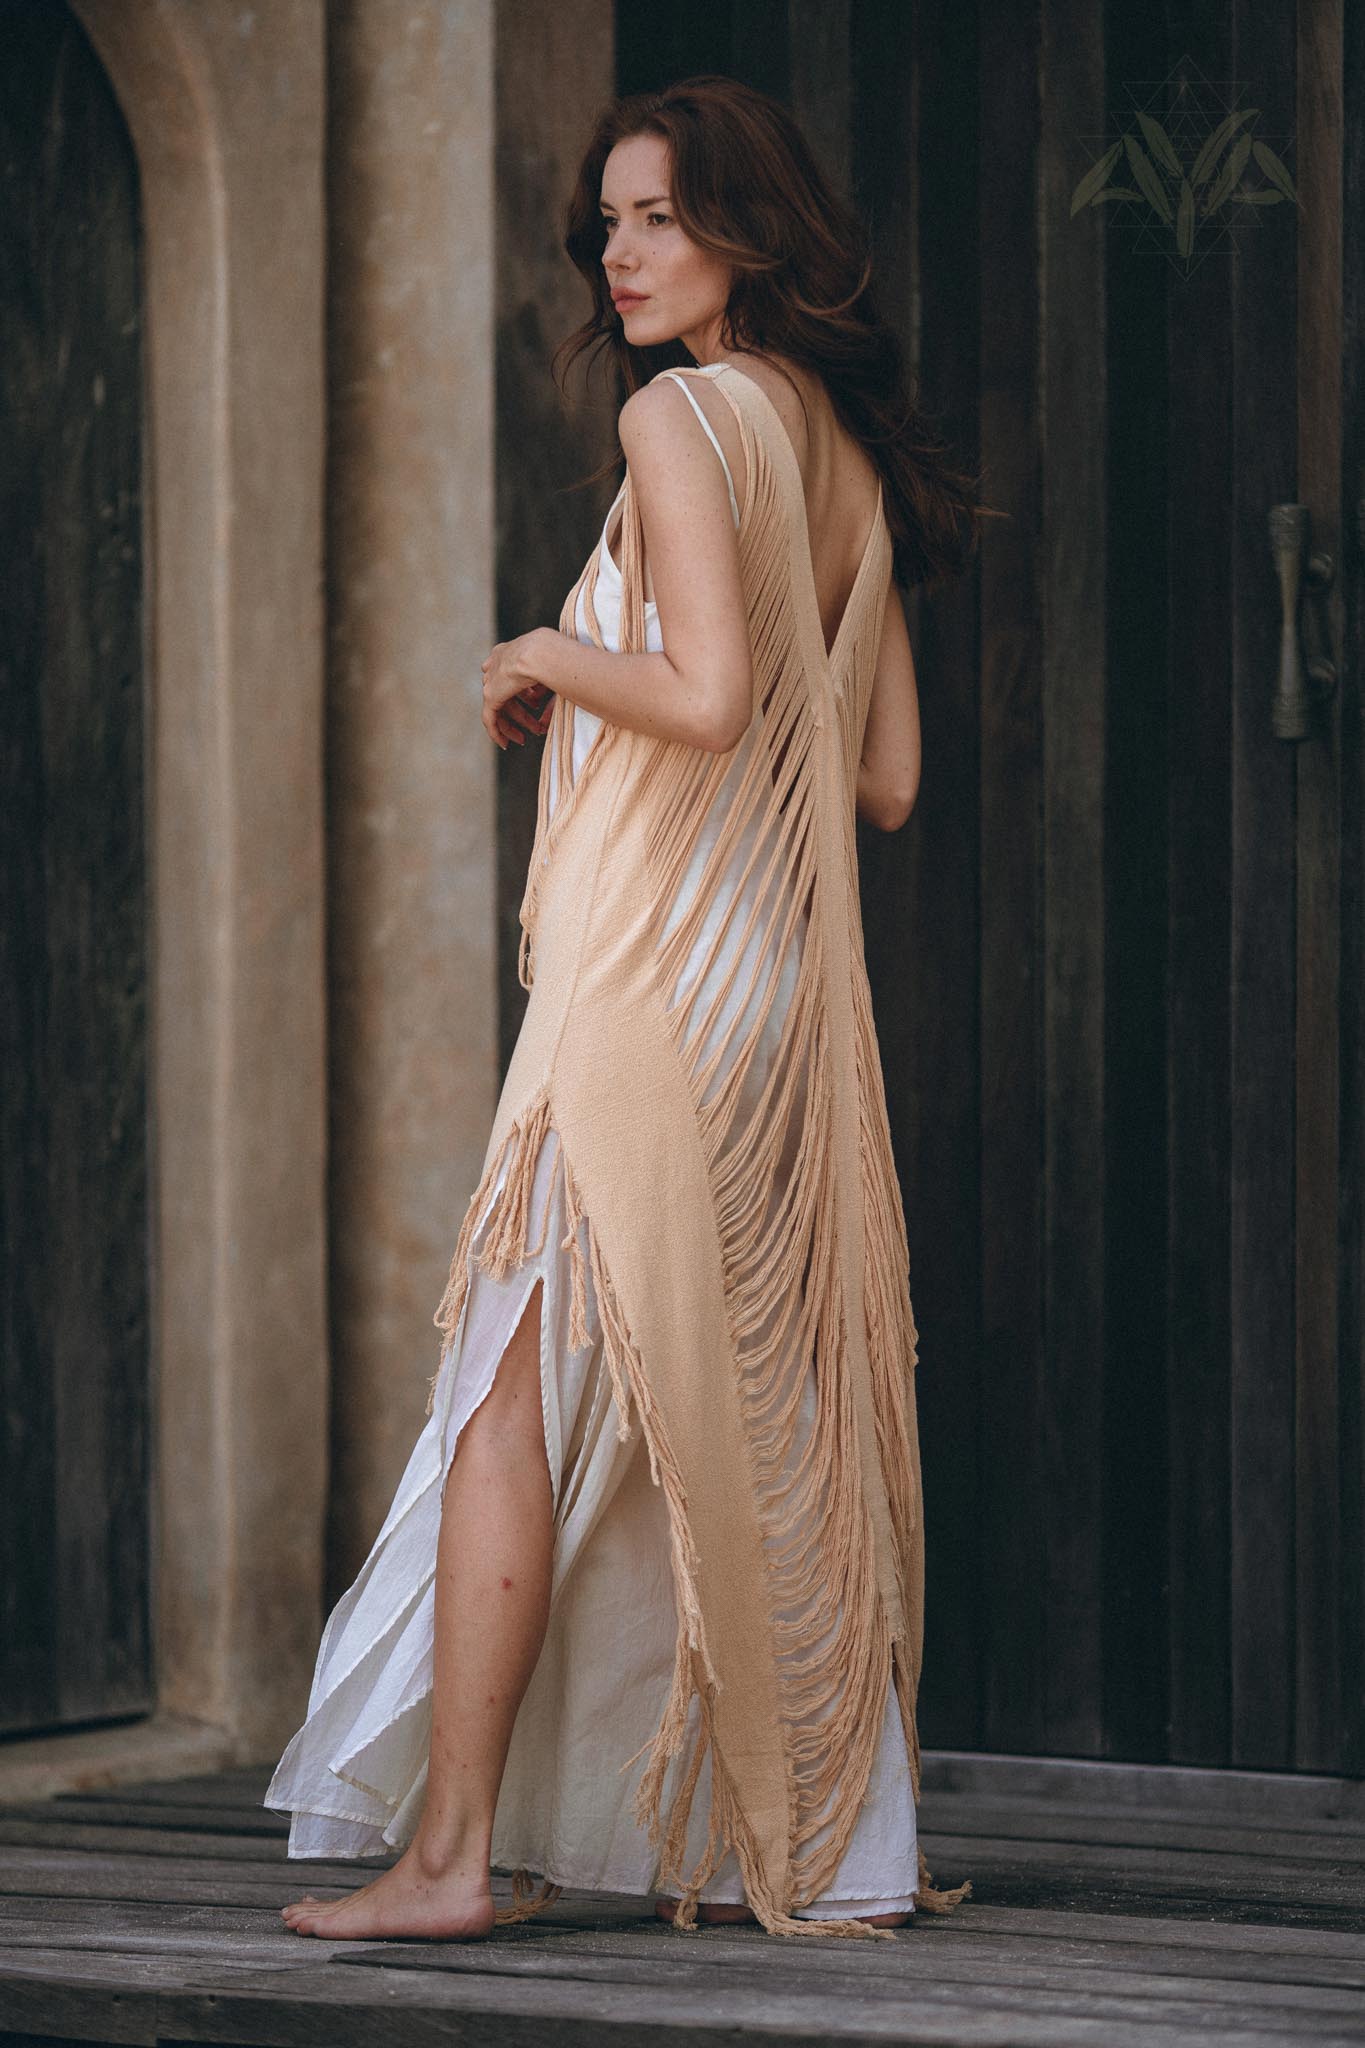 Stylish piece of "Threads of Life" dress in beige and ochre to wear over your favorite slip dress.